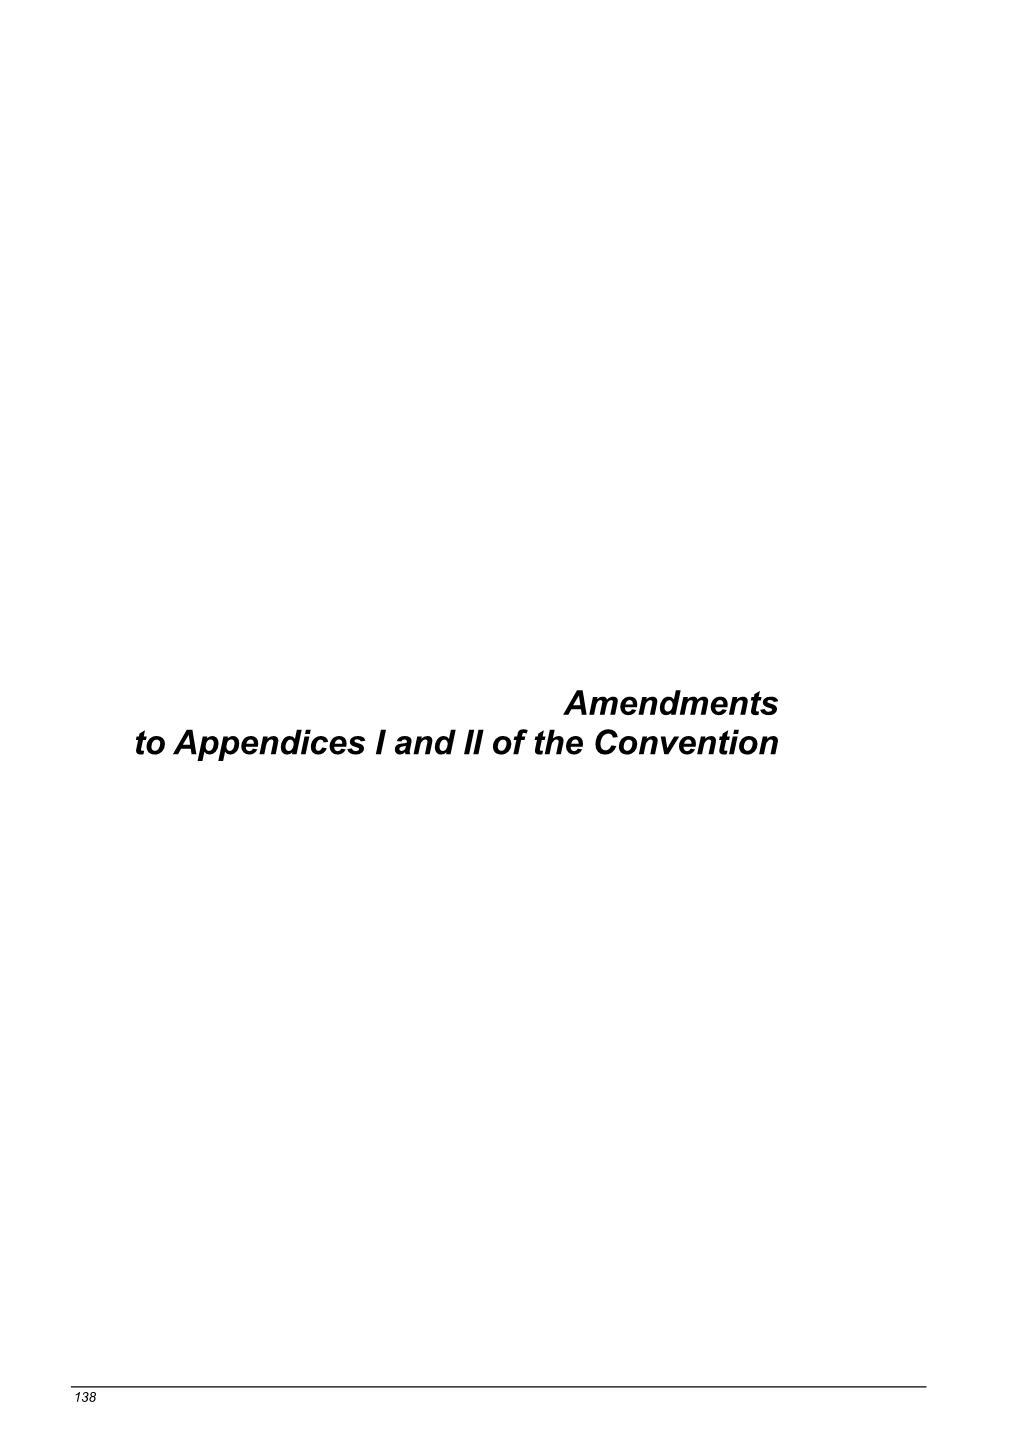 Amendments to Appendices I and II of the Convention